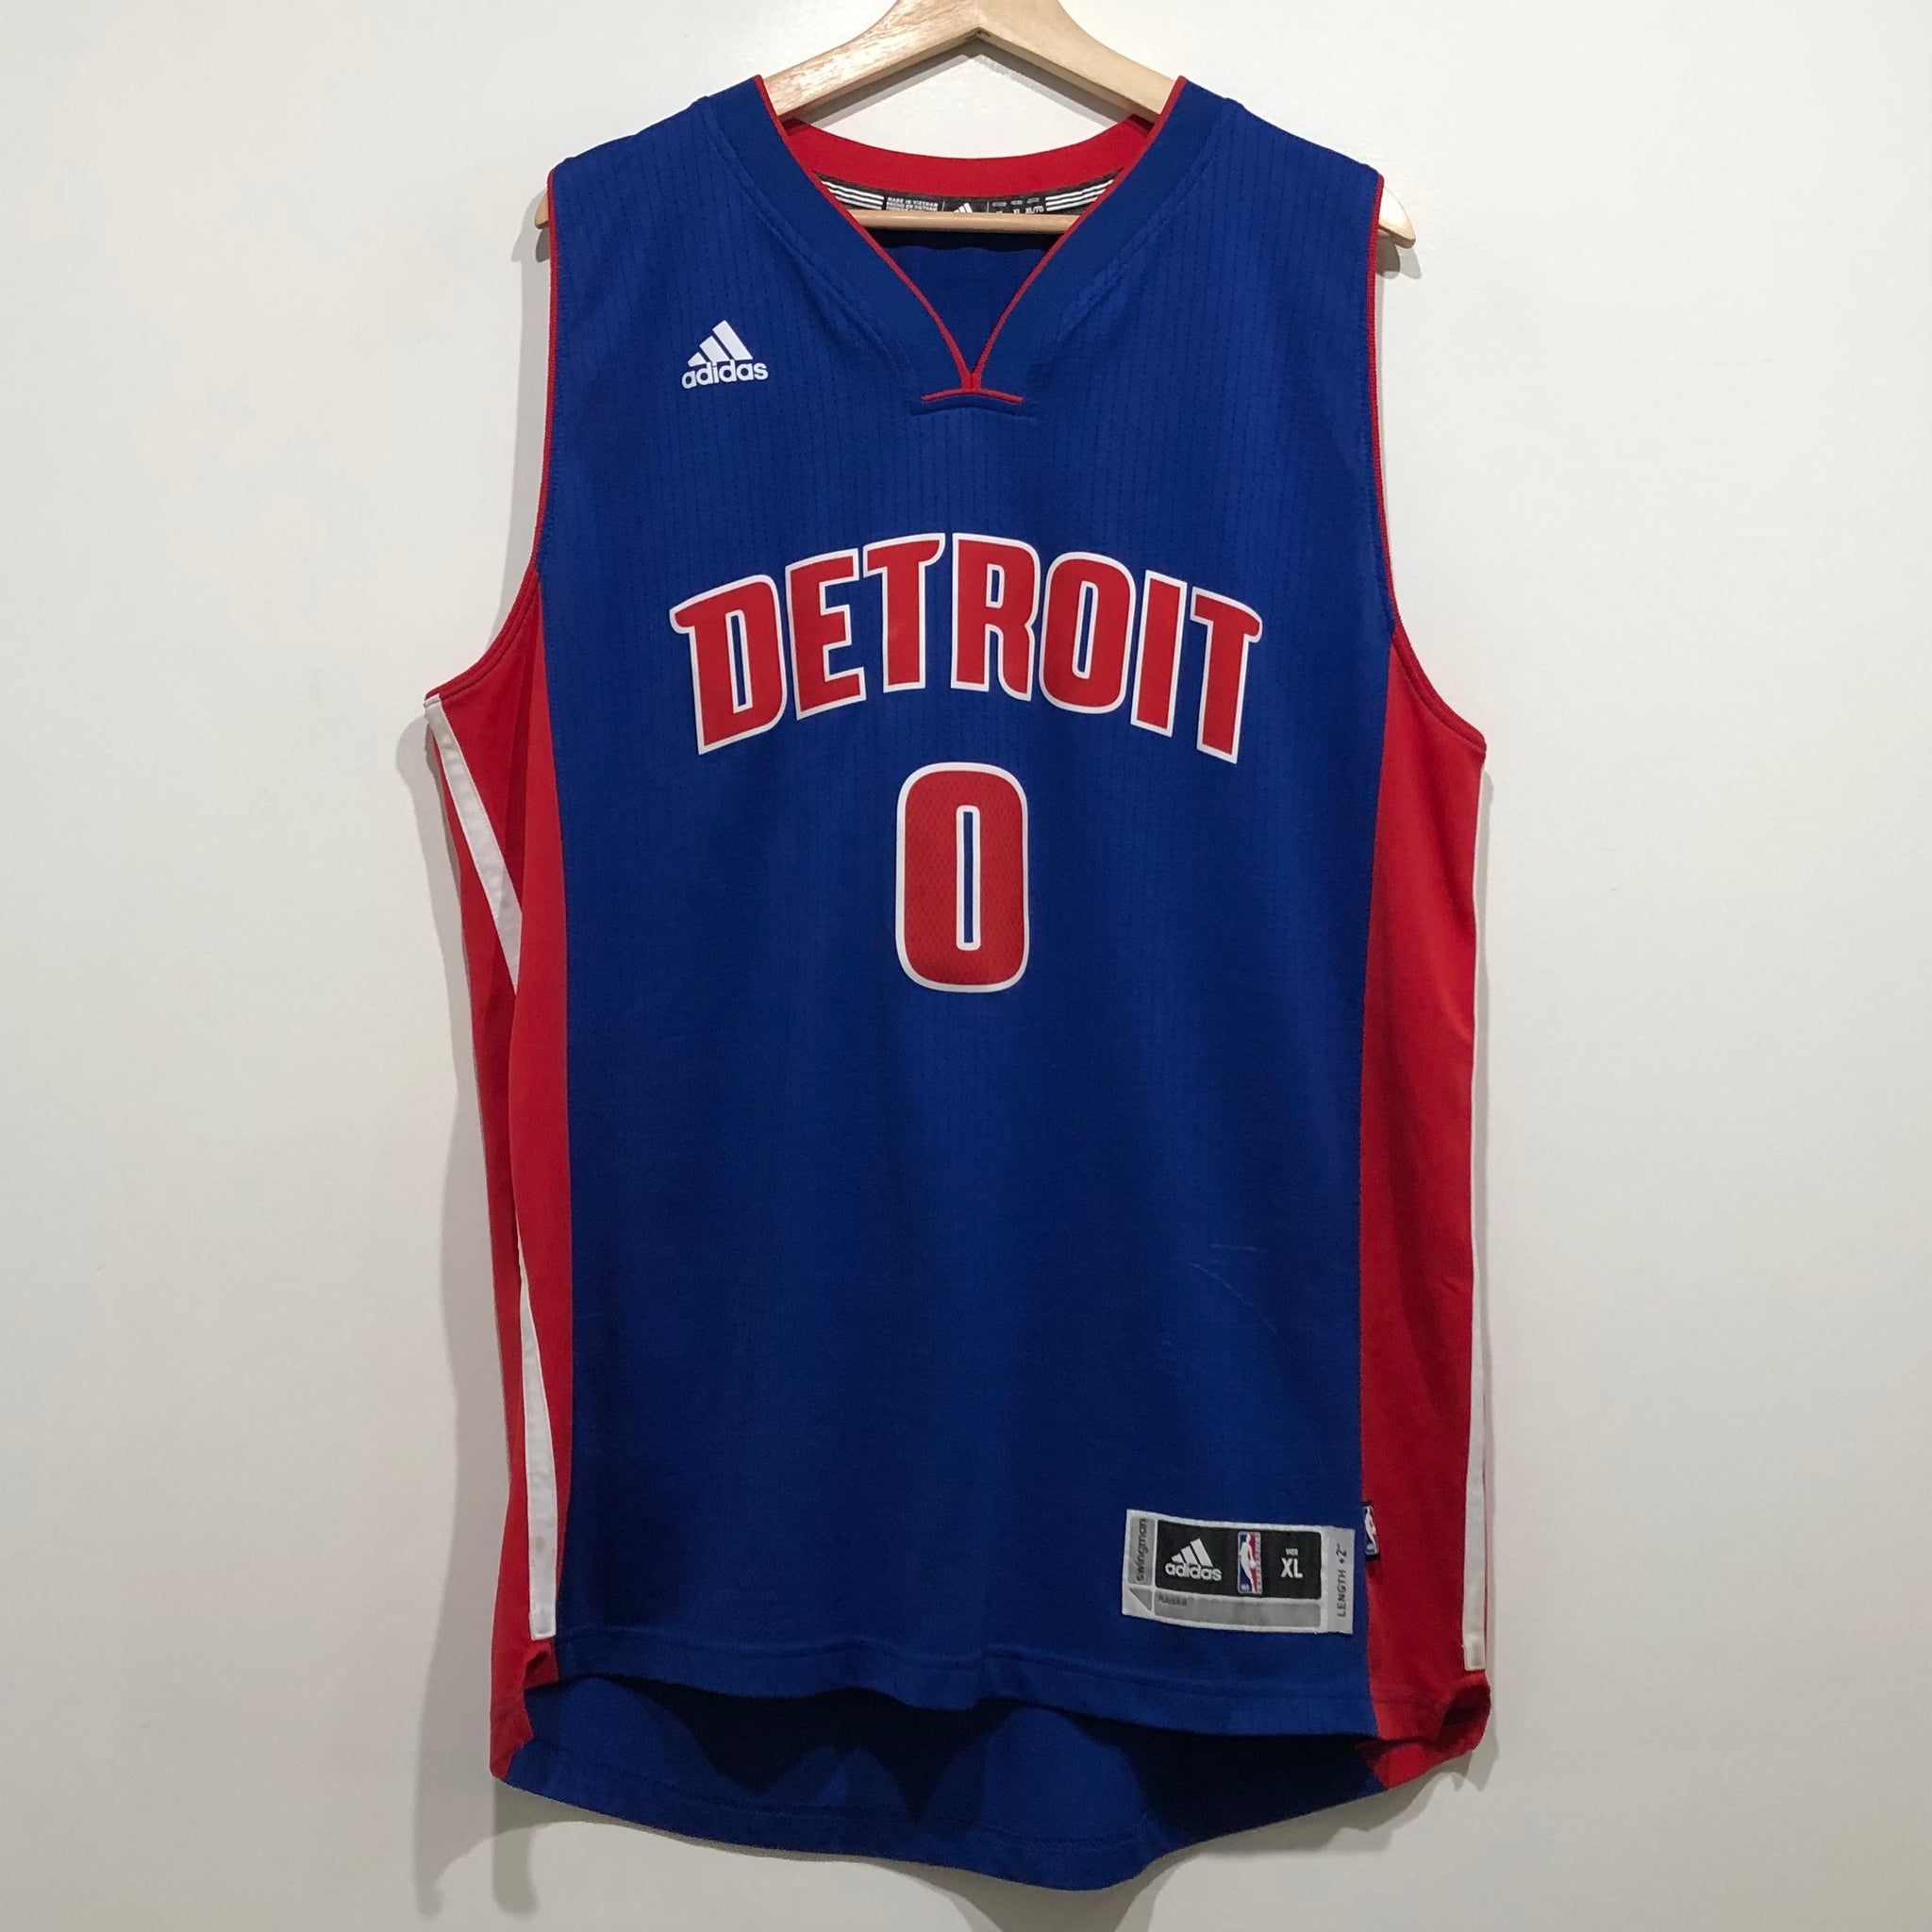 Pistons misspell Andre Drummond's name on back of his jersey